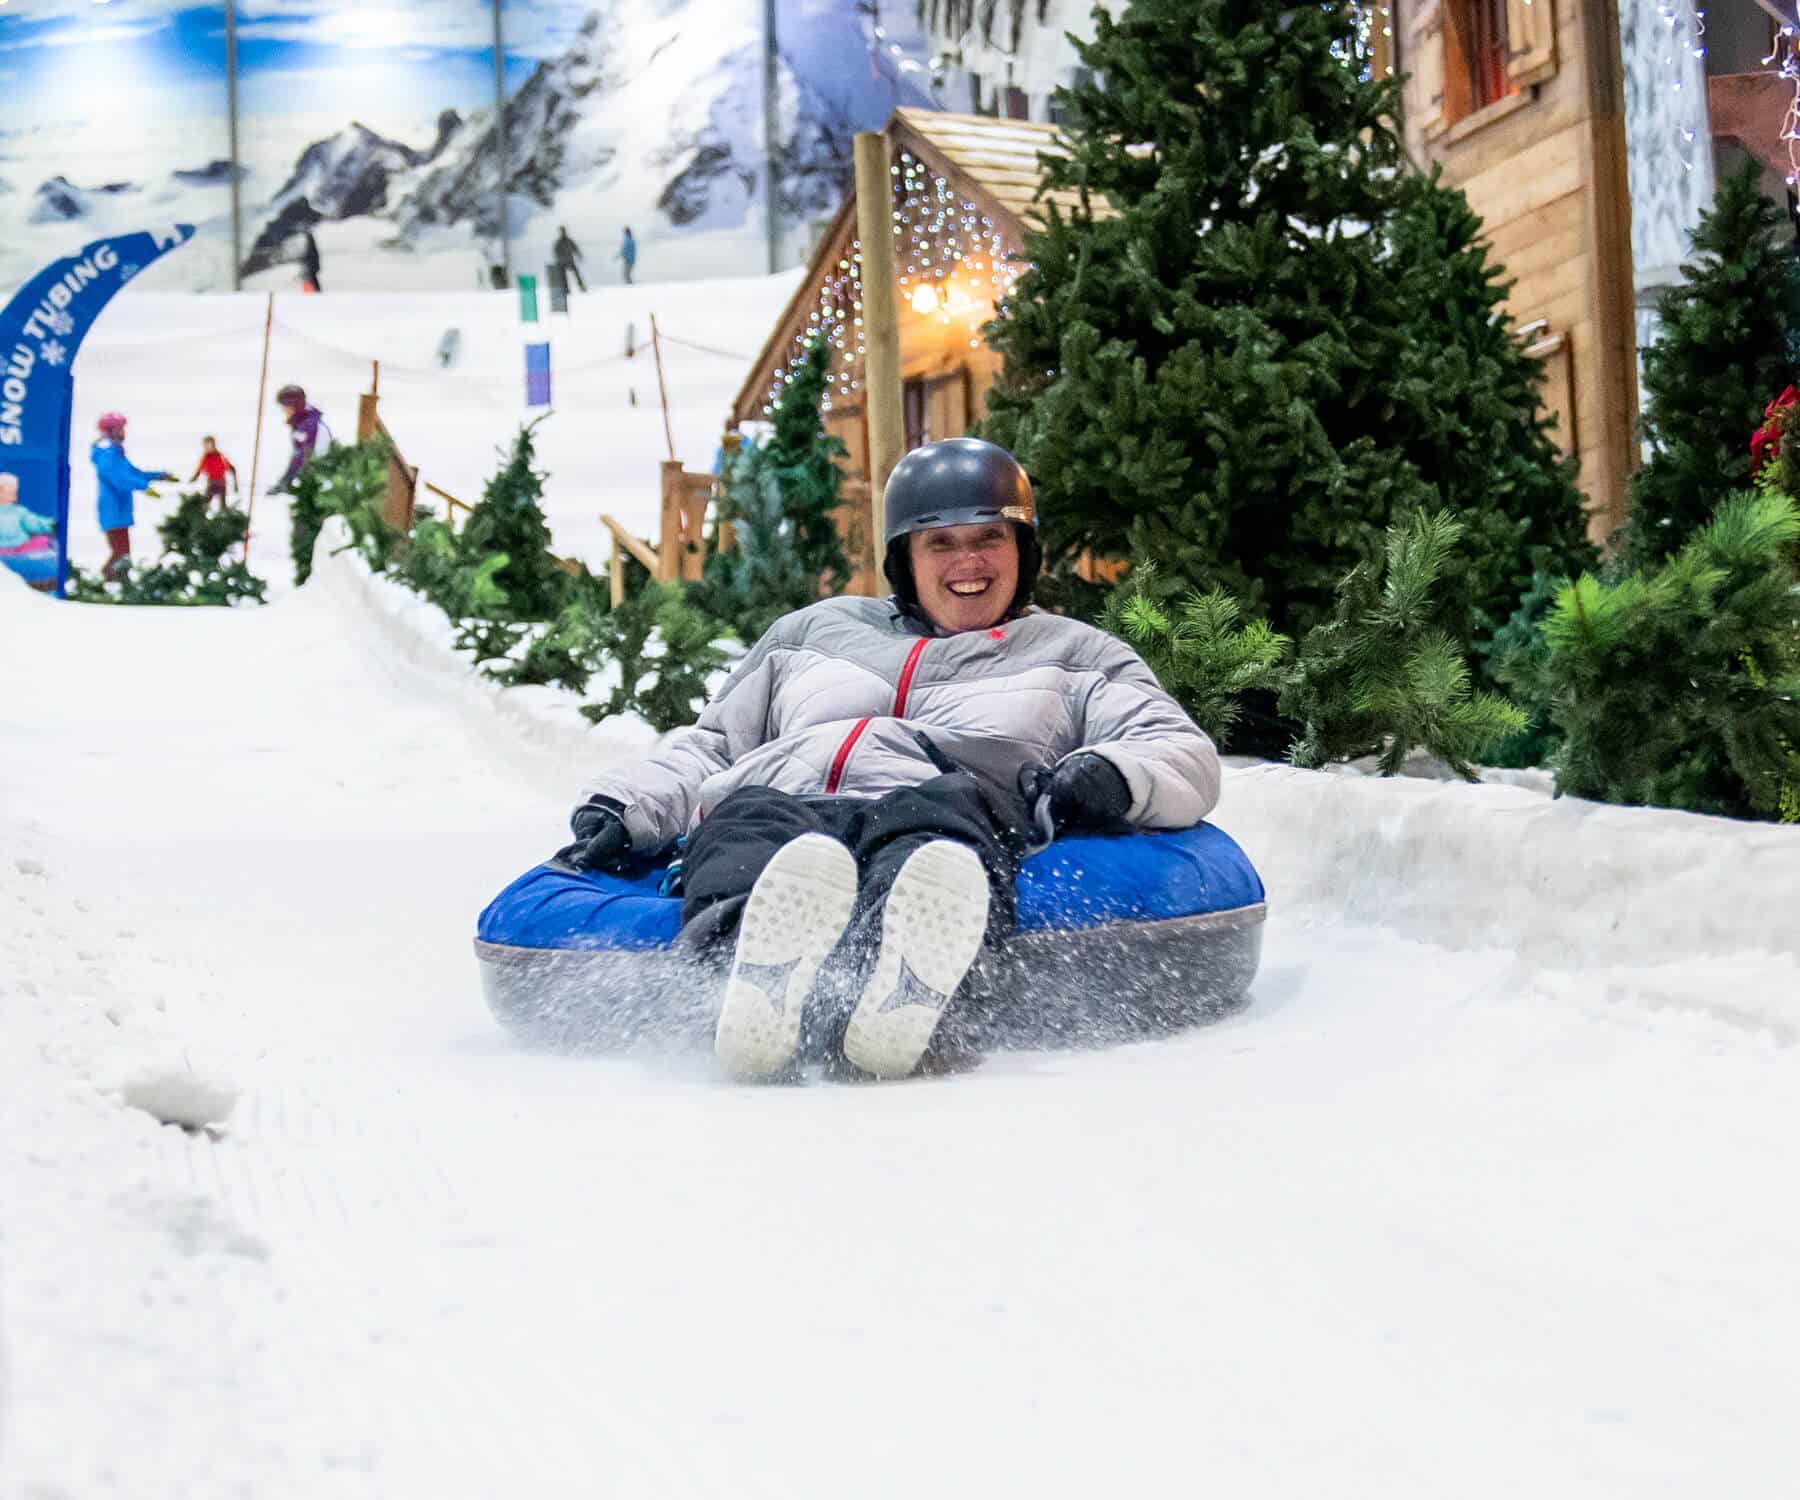 snow tubing is fun for adults and kids